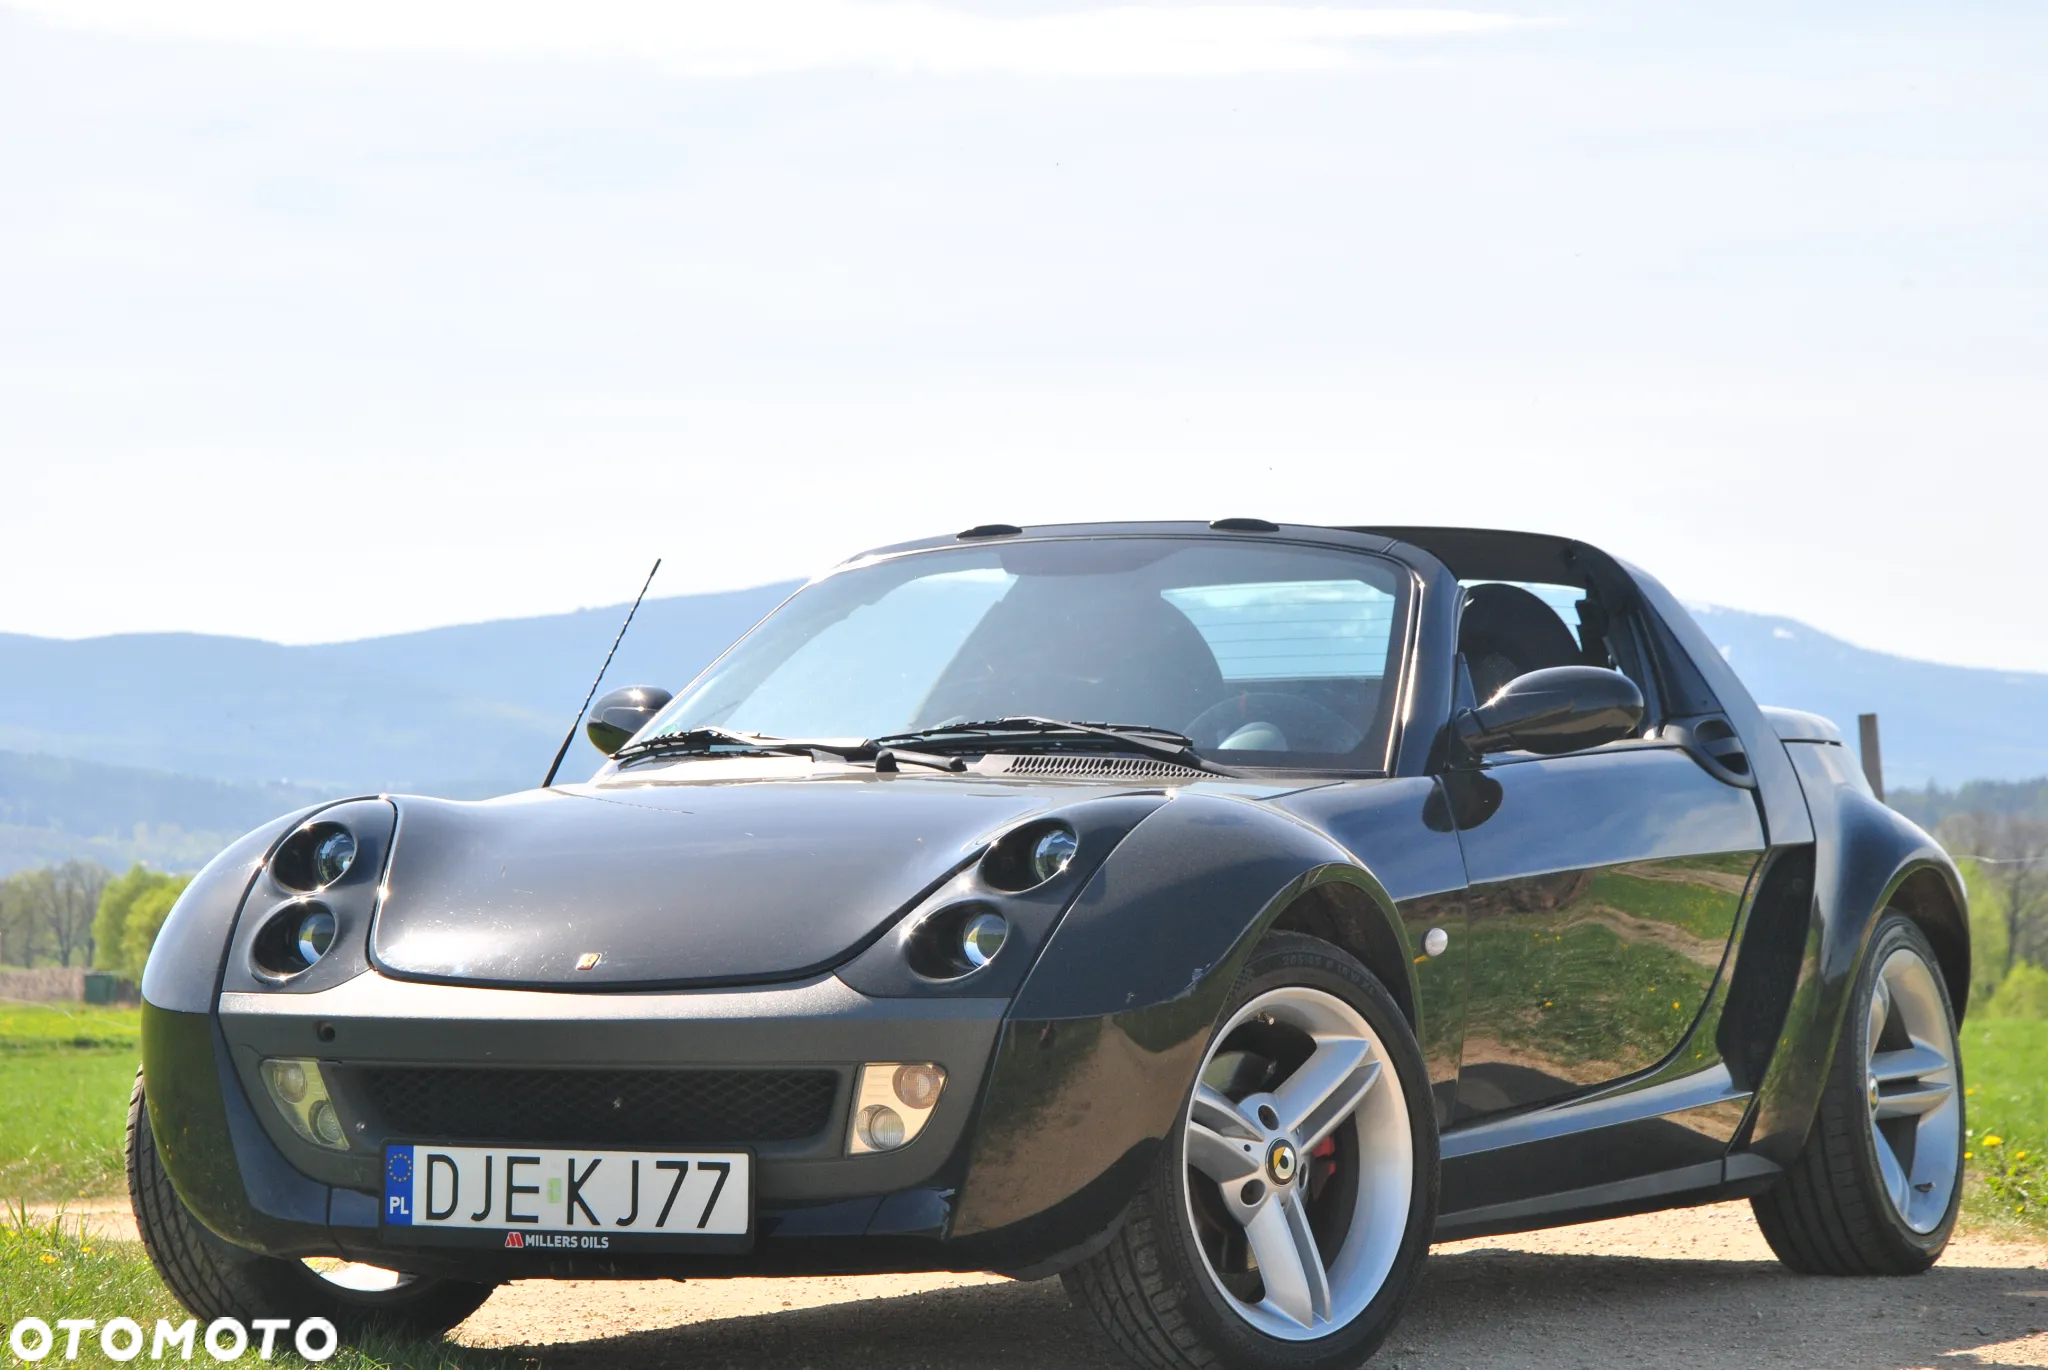 Smart Roadster coupe - 35